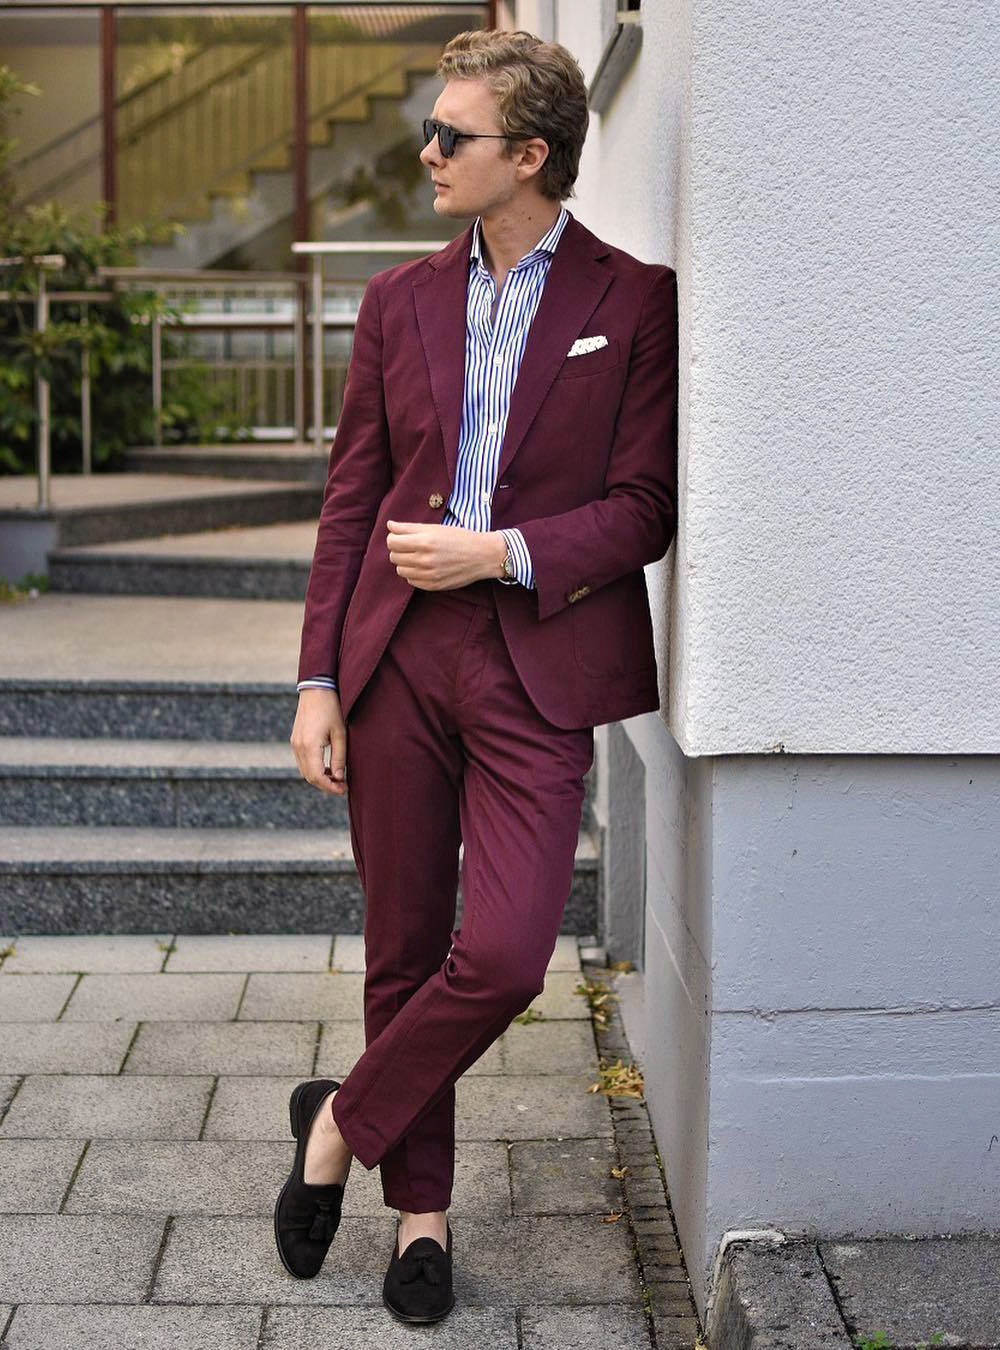 burgundy suit, patterned navy blue shirt, and black loafers